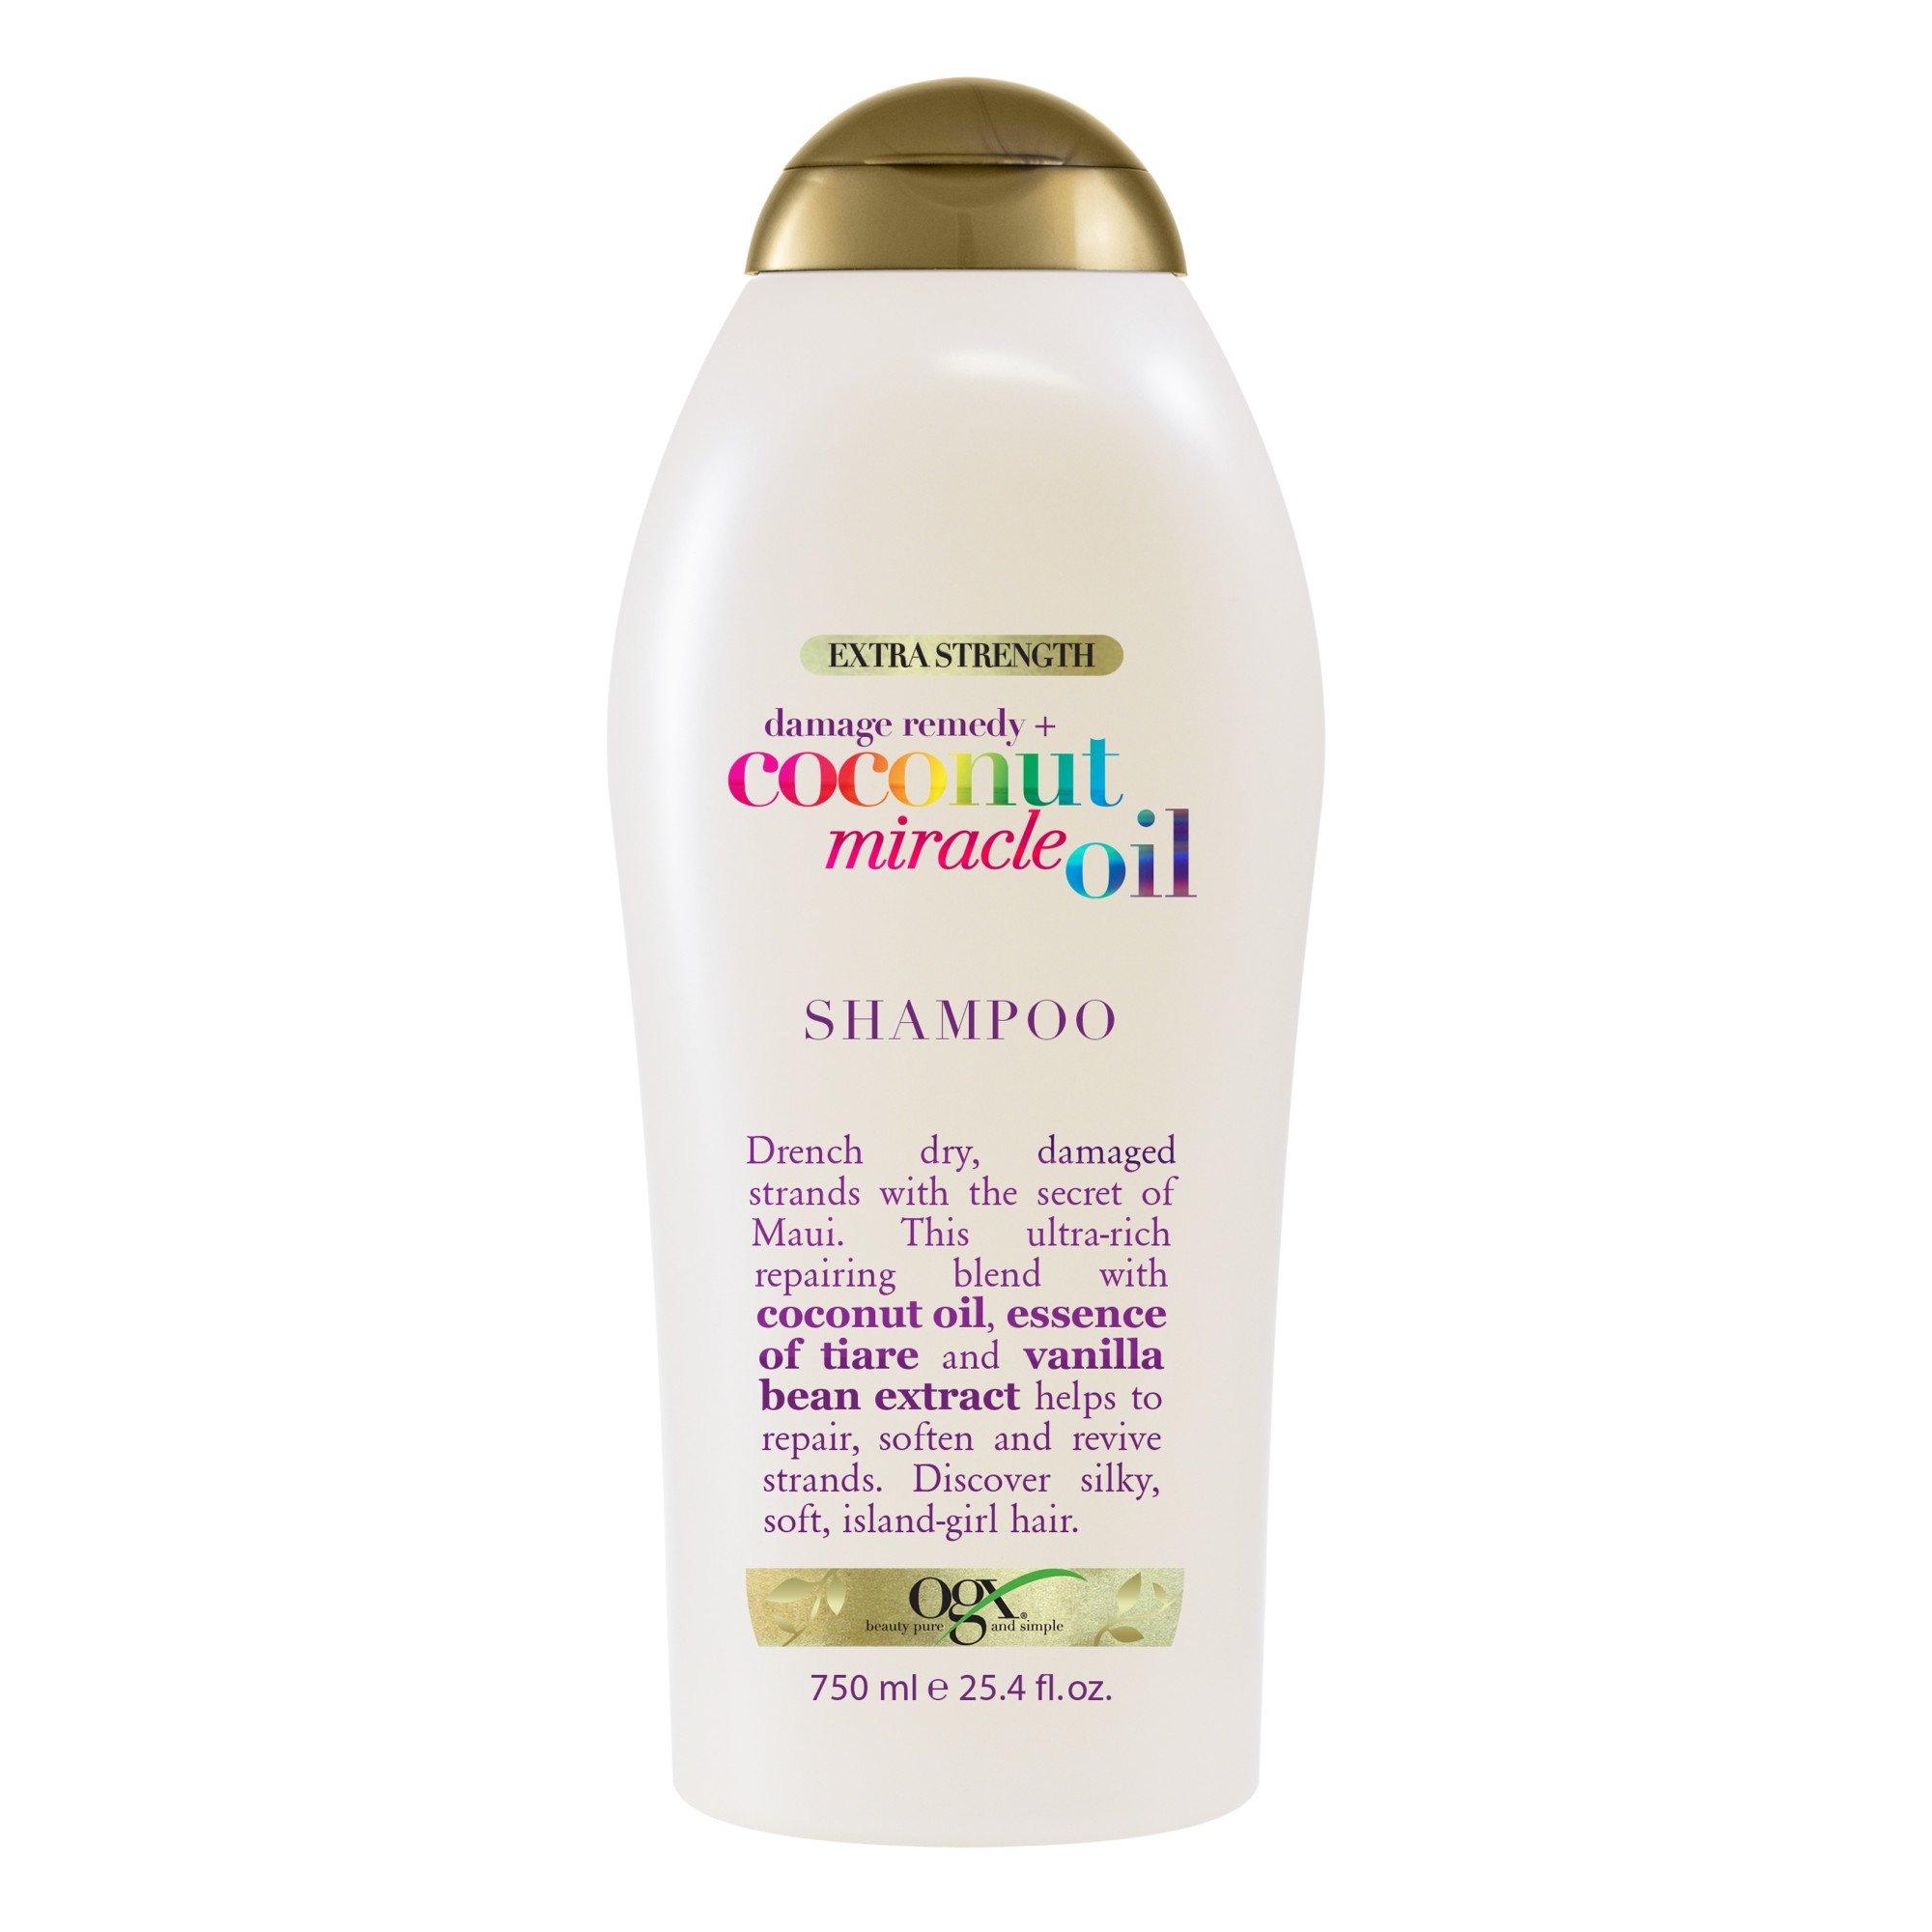 Kriger repertoire rørledning OGX Coconut Miracle Oil Shampoo - Shop Shampoo & Conditioner at H-E-B